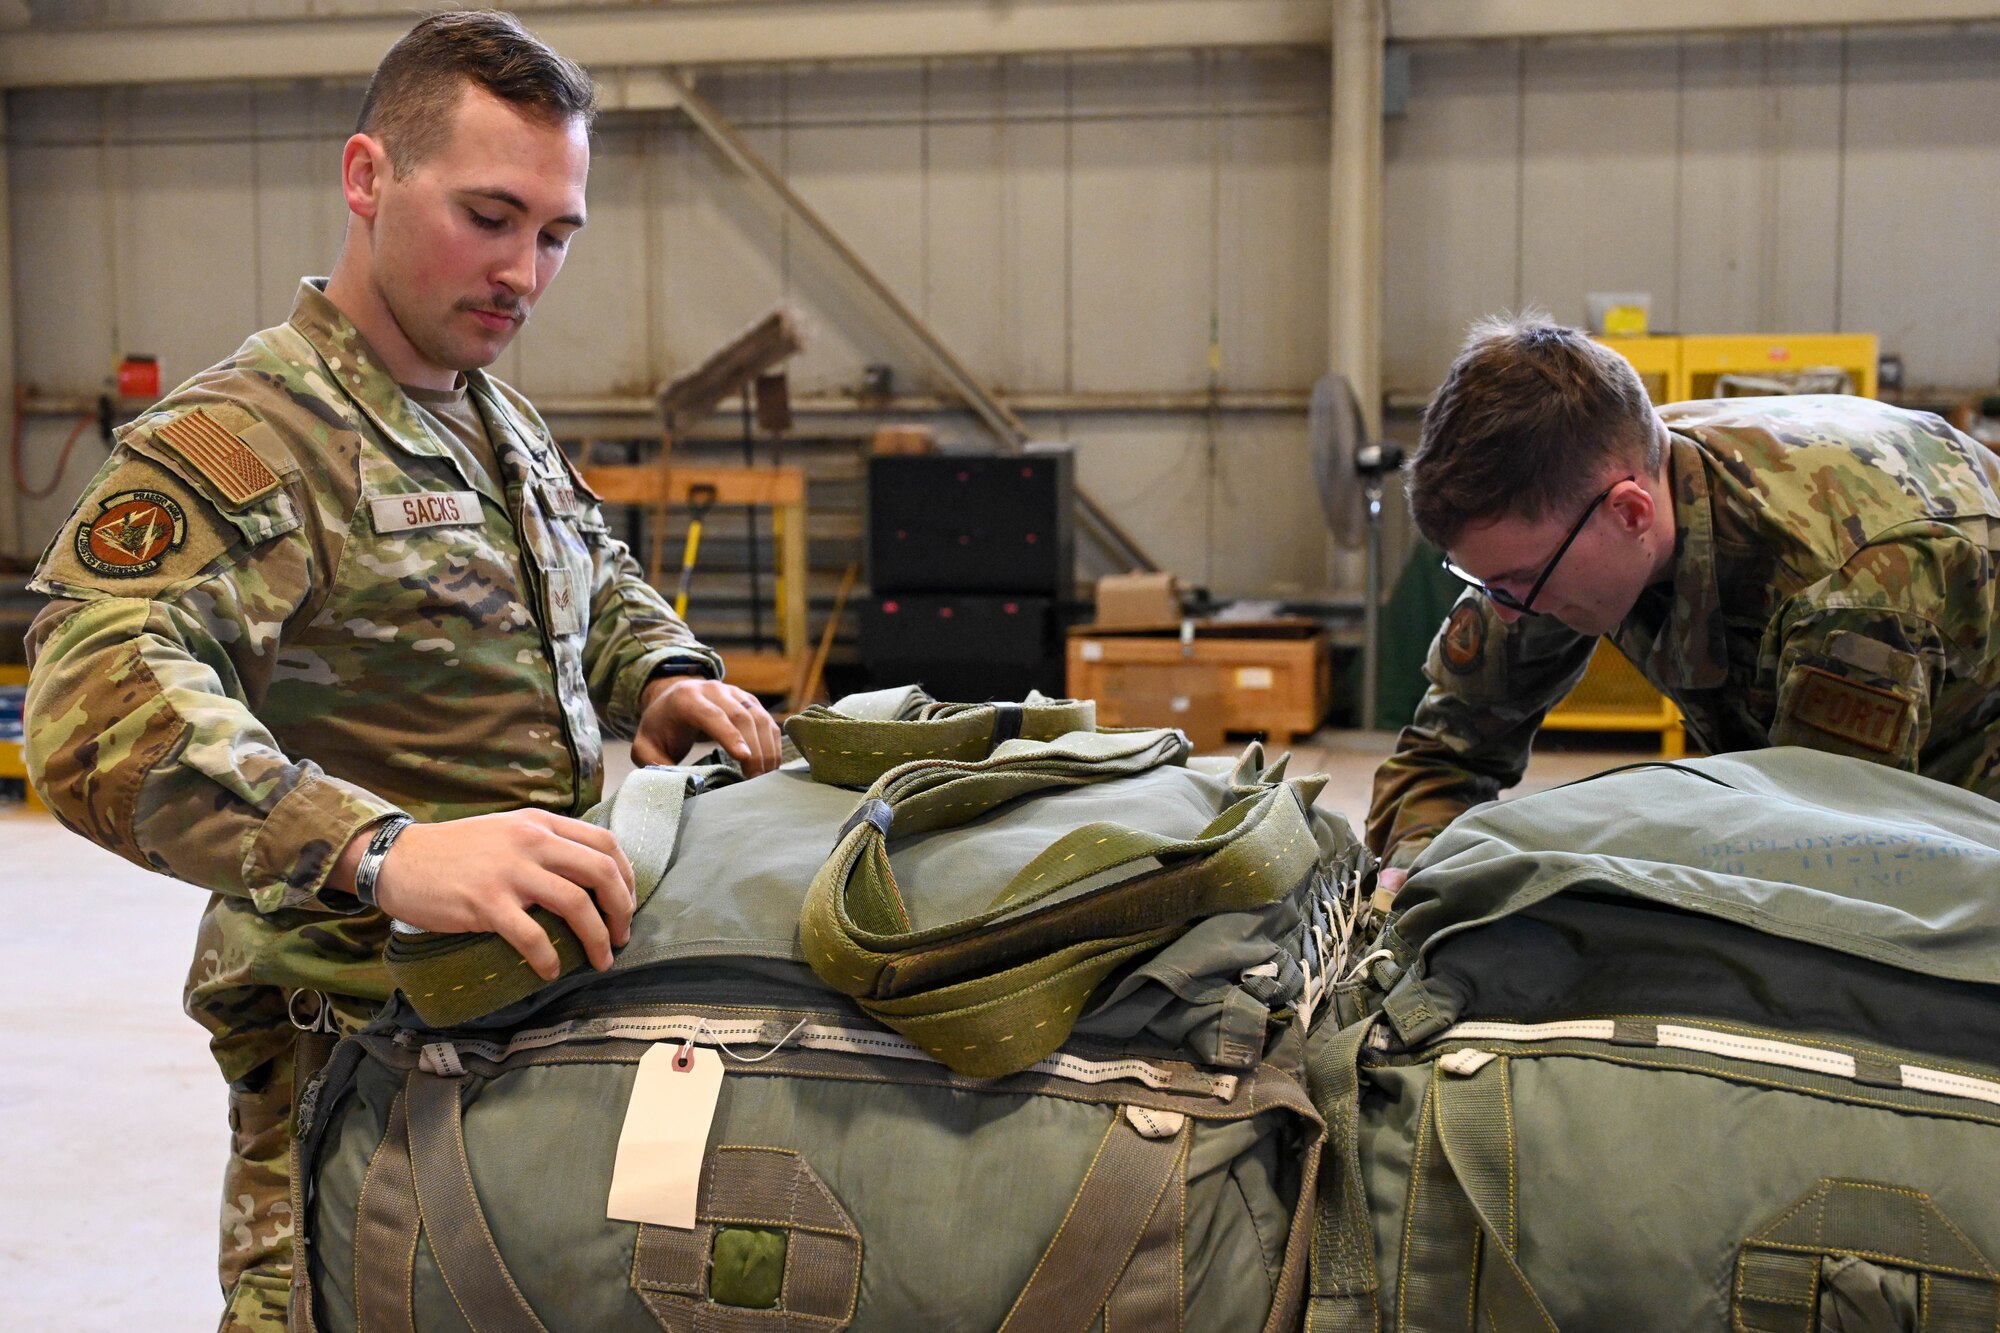 U.S. Air Force Senior Airman Logan Sacks, 97th Logistics Readiness Squadron (LRS) unilateral aircrew training (UAT) rigging supervisor, and Senior Airman Jack Woodmansey, 97 LRS UAT rigging element member, load a duel row airdrop system in preparation for a large force exercise at Altus Air Force Base, Oklahoma, March 23, 2023. The flight assembled eight pallets for air-drop training during the severe weather exercise. (U.S. Air Force photo by Senior Airman Trenton Jancze)